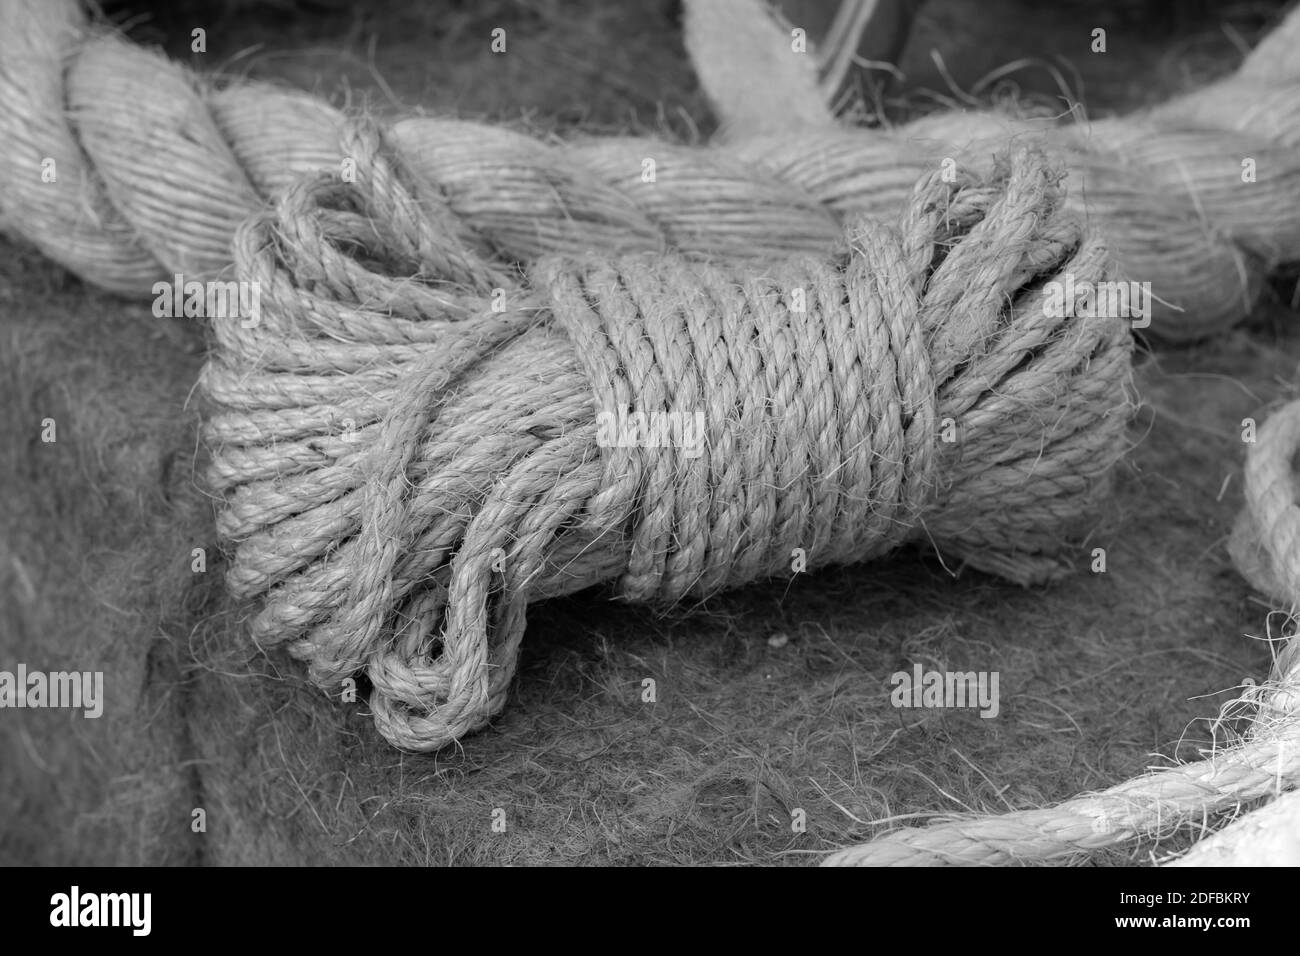 Jute rope Black and White Stock Photos & Images - Alamy